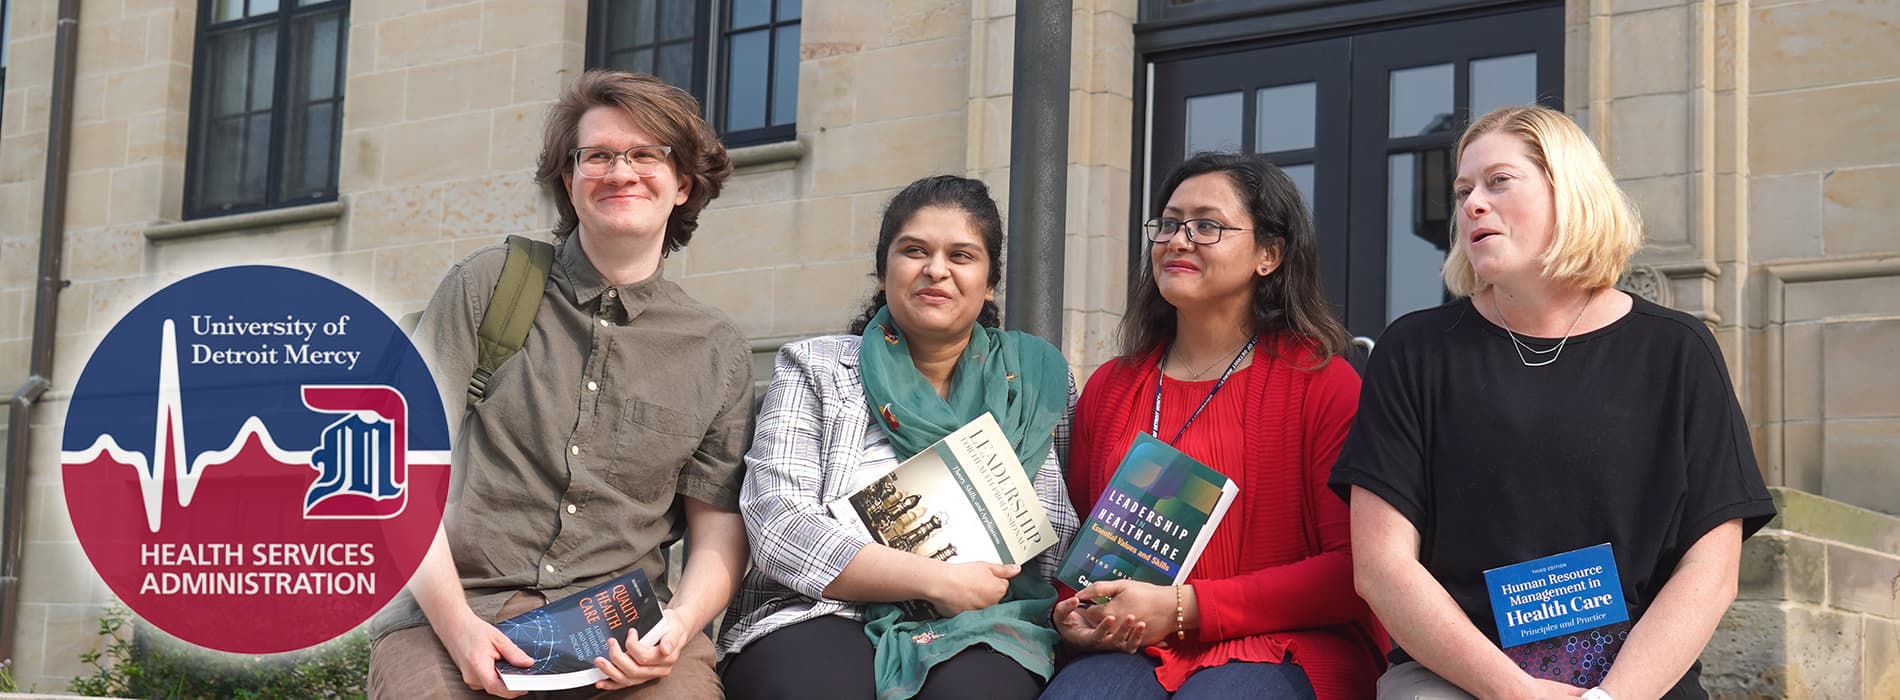 hsa grad students sitting outside holding books